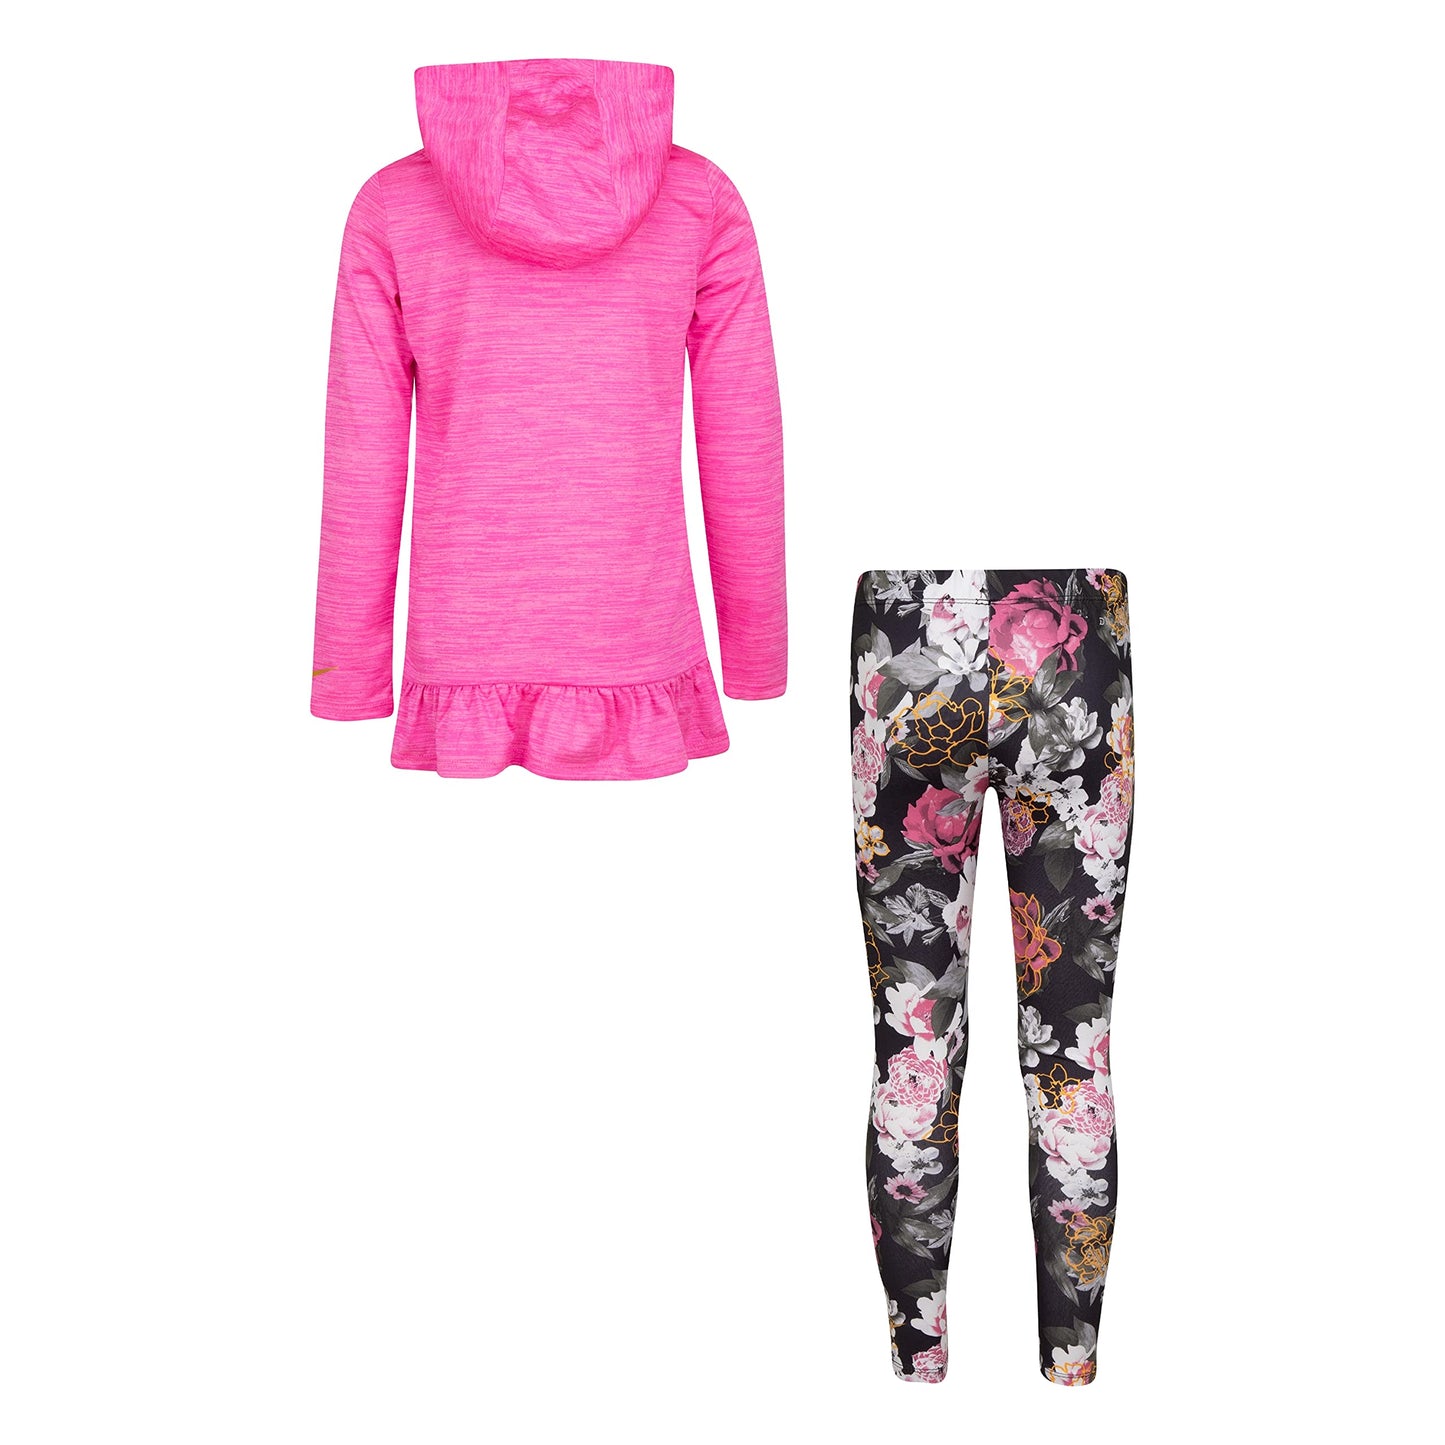 Image 3 of Dri-FIT™ Hooded Tunic and Leggings Set (Little Kids)